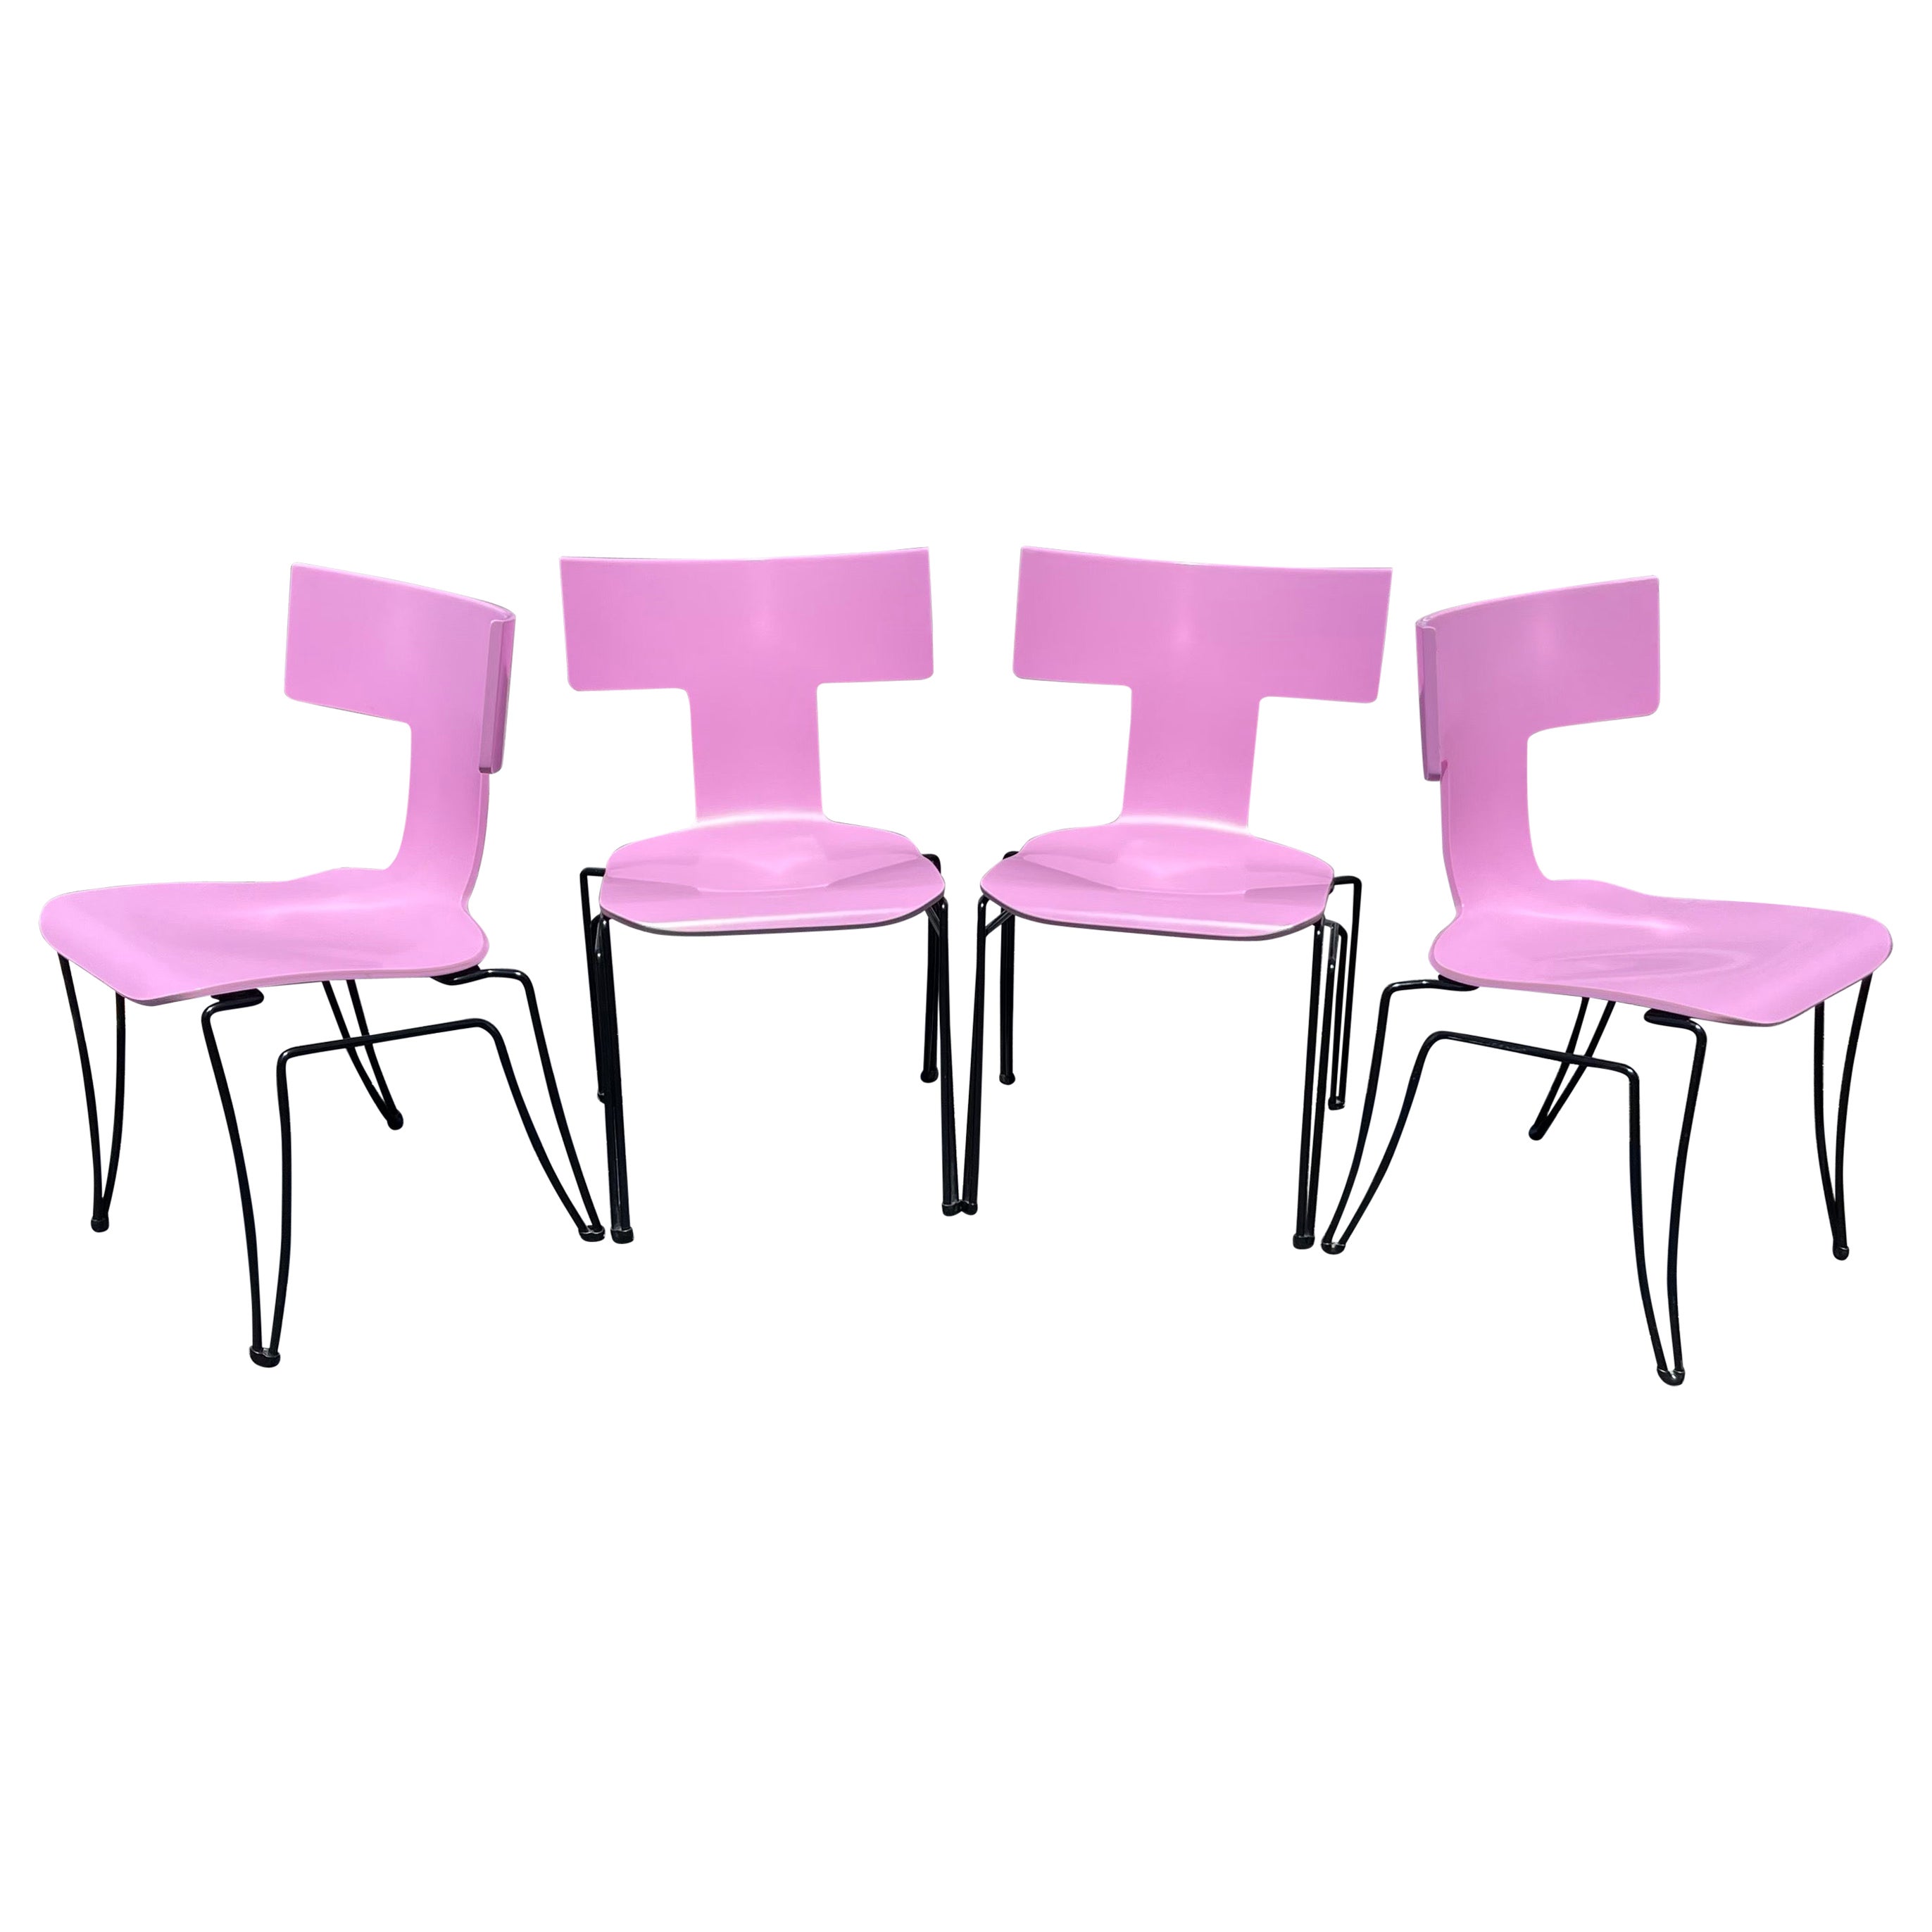 Postmodern Donghia Anziano Pink Bentwood Klismos Chair by John Hutton, Set of 4